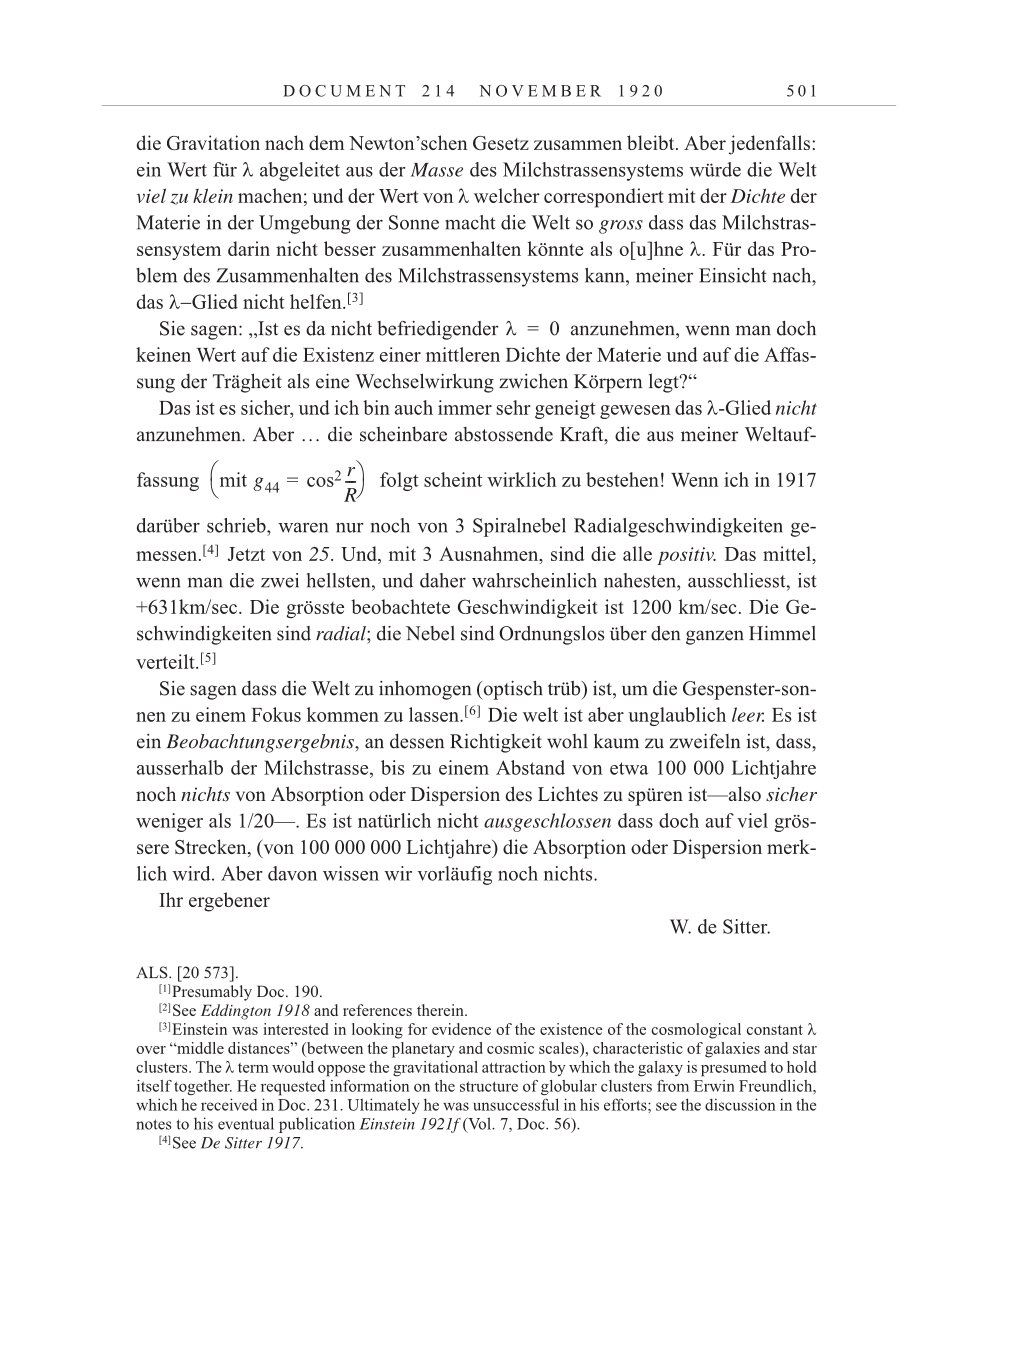 Volume 10: The Berlin Years: Correspondence May-December 1920 / Supplementary Correspondence 1909-1920 page 501